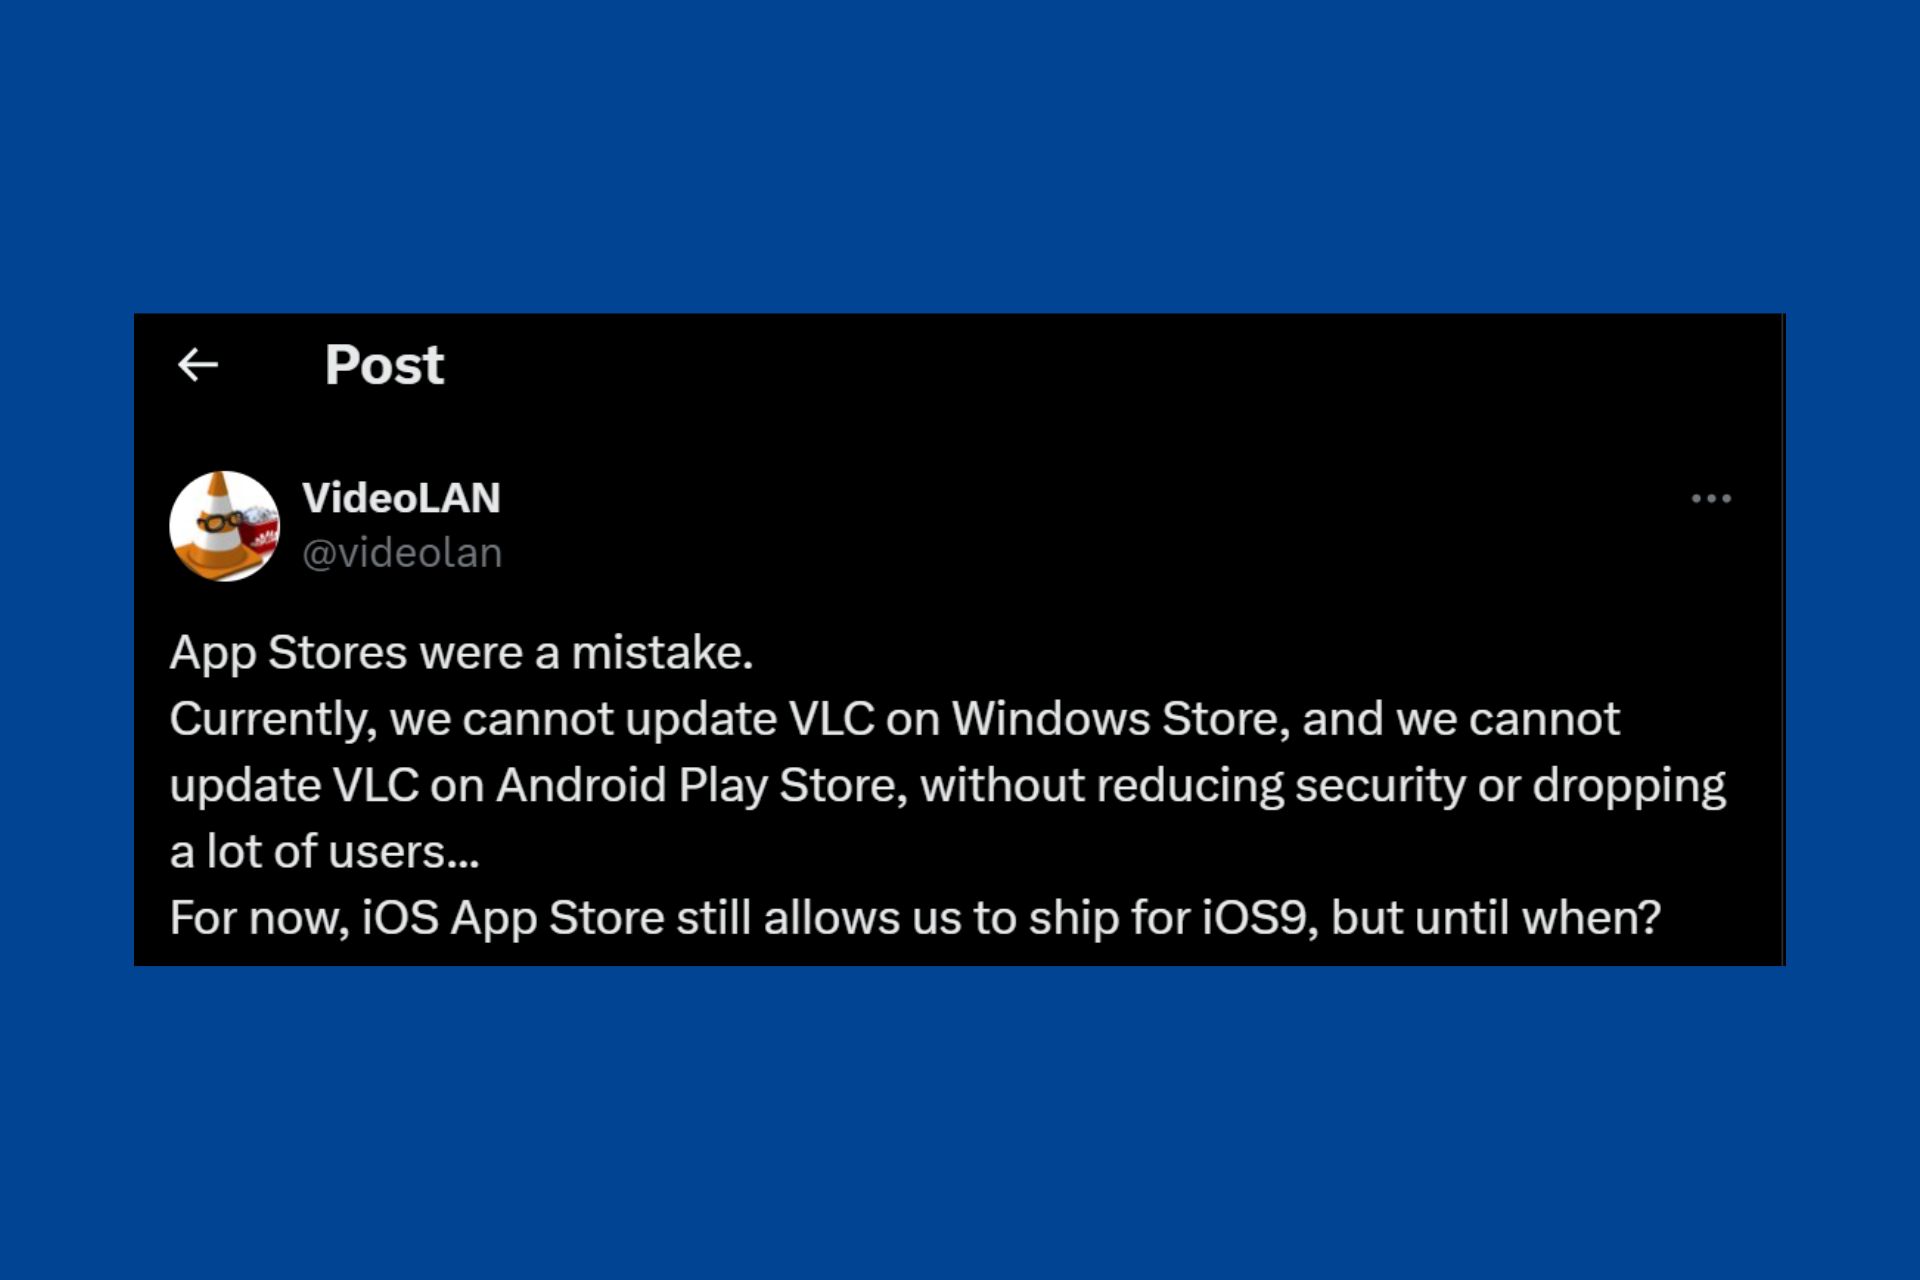 VideoLAN can't update VLC on Microsoft Store and Google Play